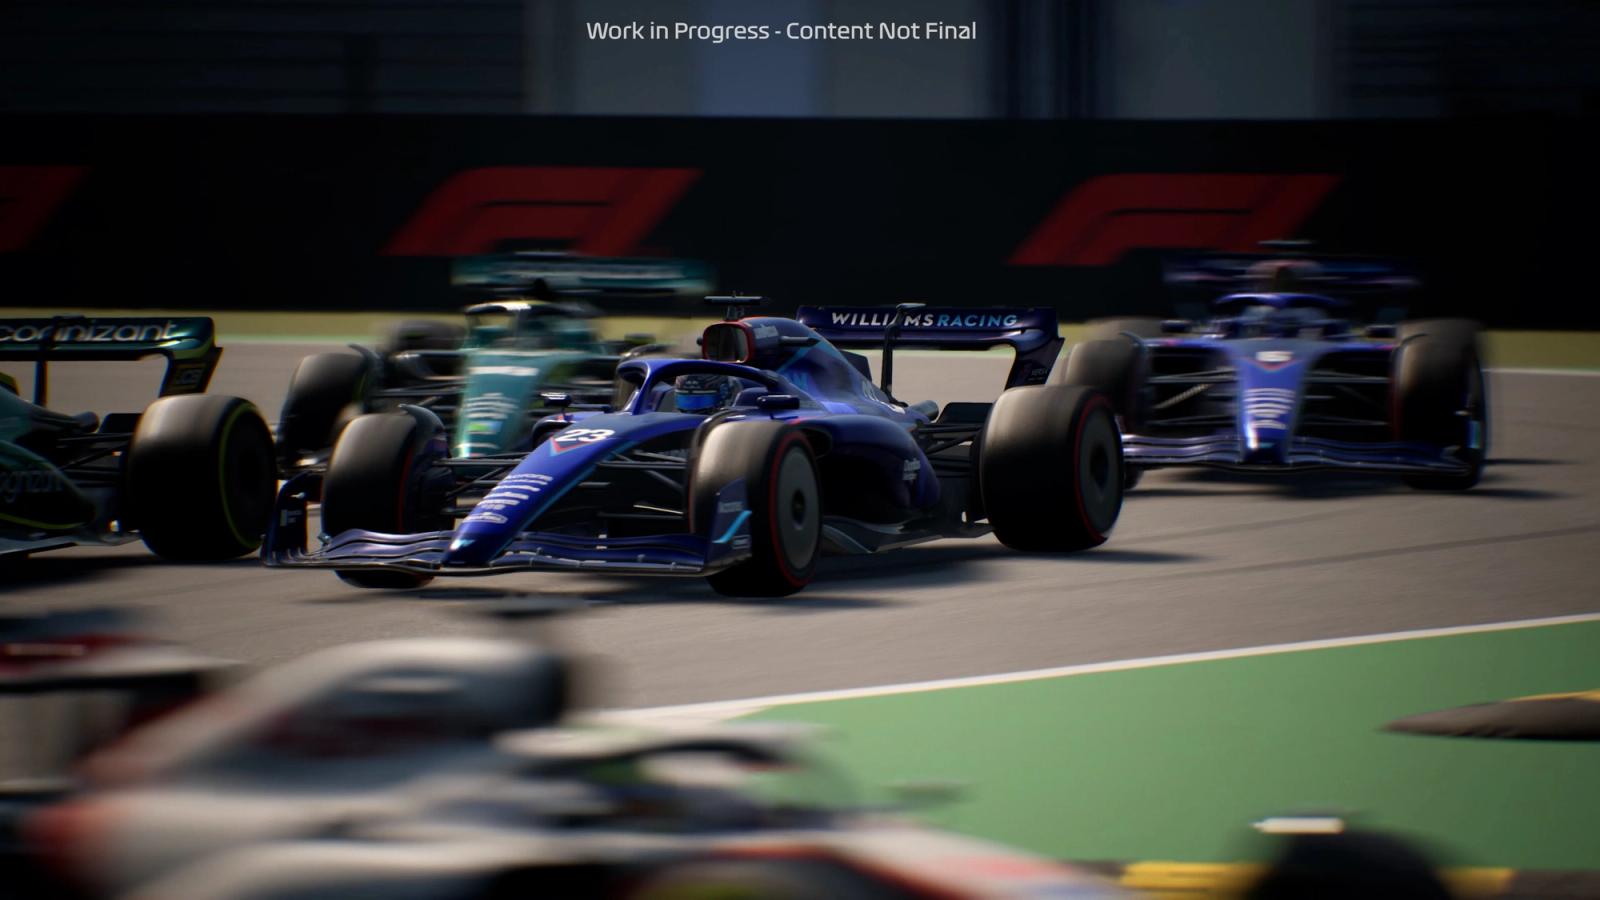 F1 Manager 2022 debuts at number 4 in UK sales charts